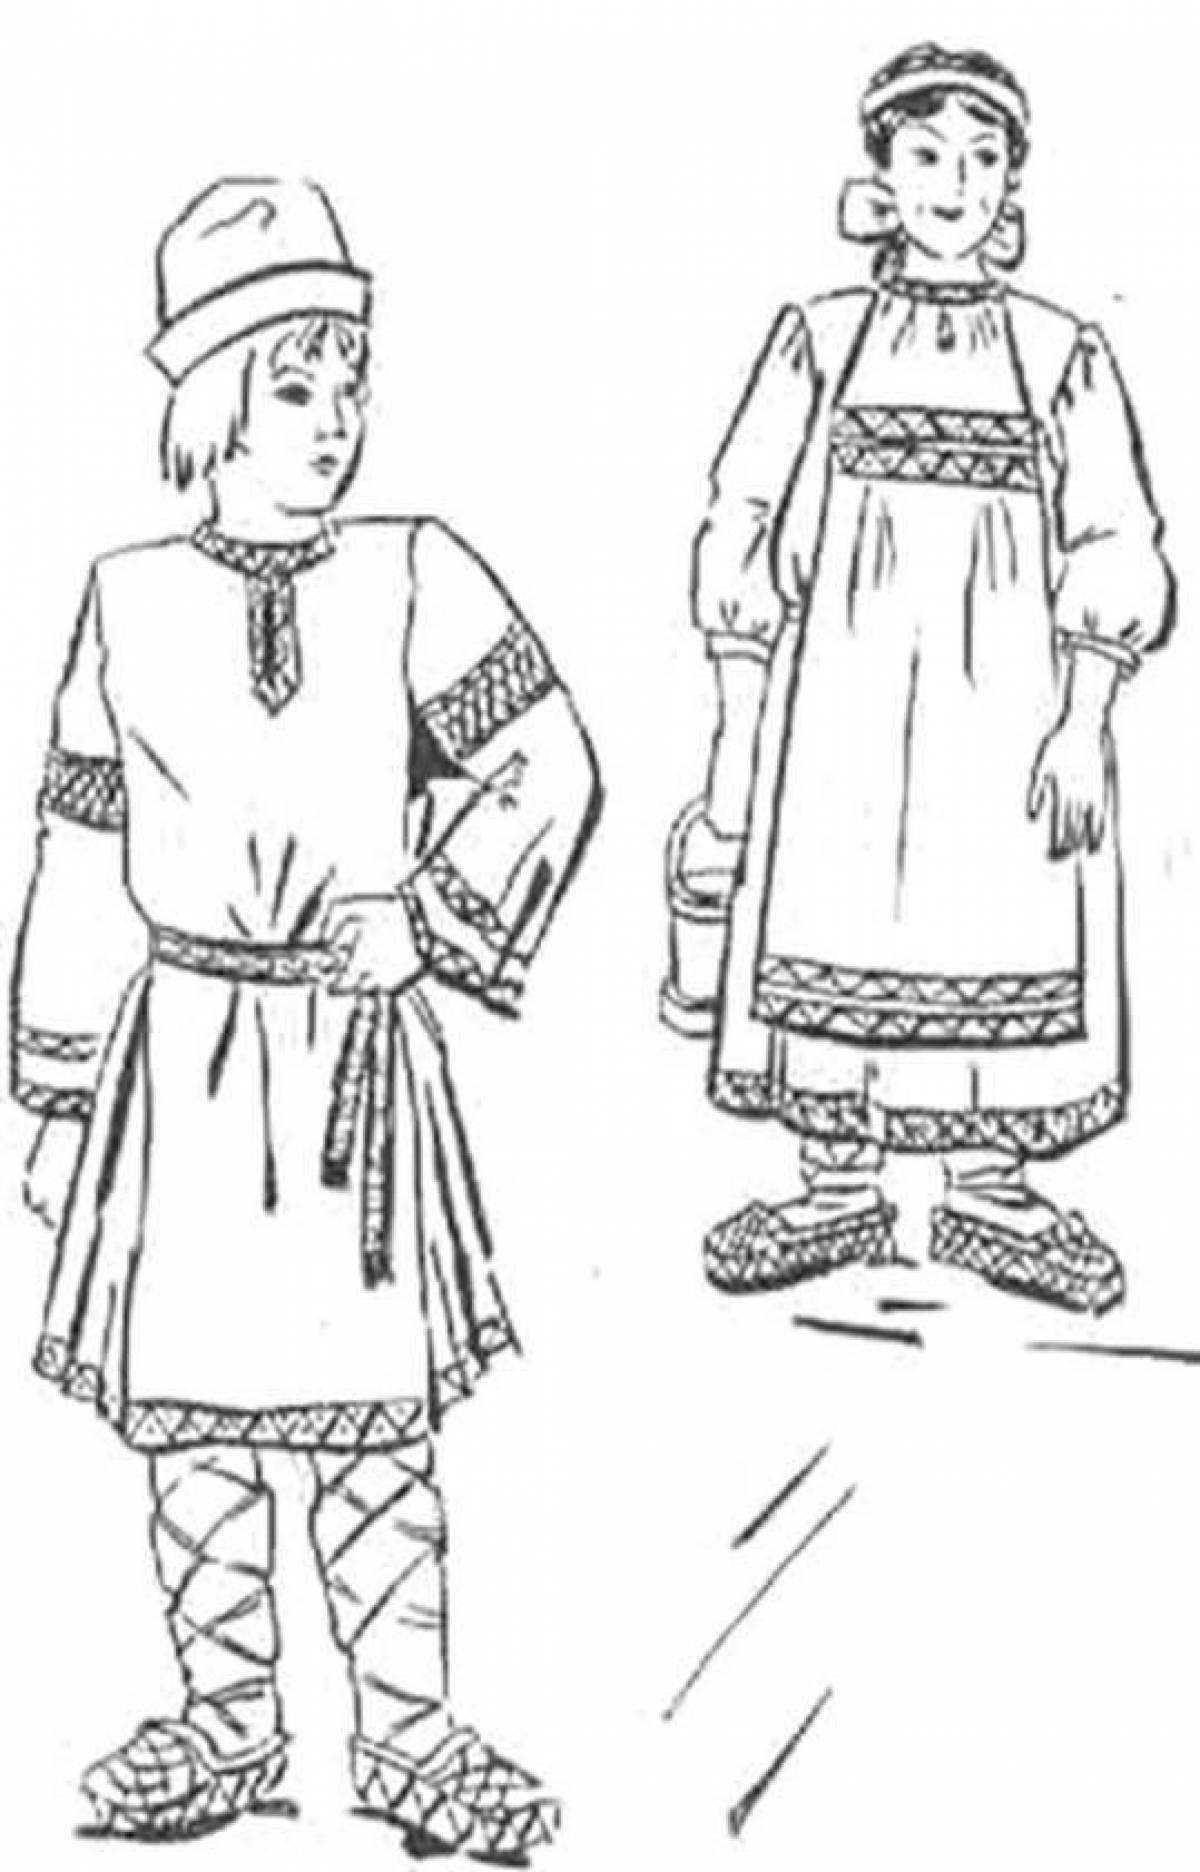 Coloring page radiant Russian national costume